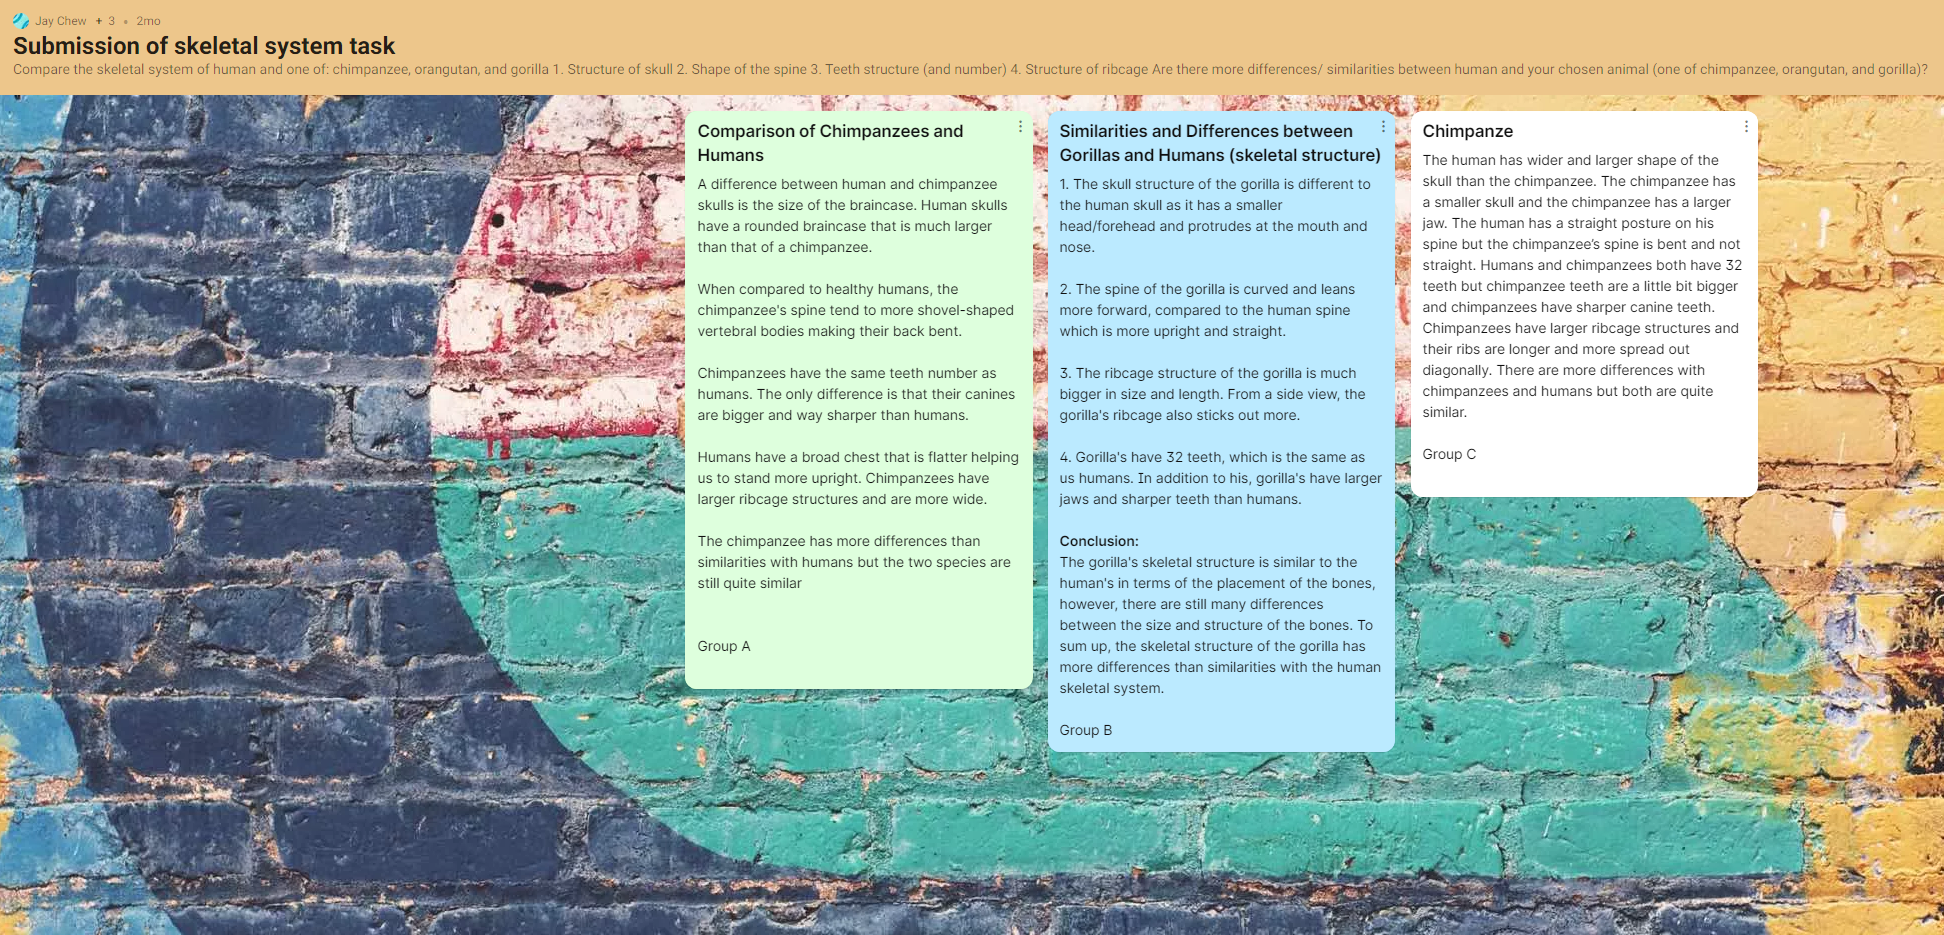 Figure 3: The Padlet activity to compare the skeletal system of different hominids